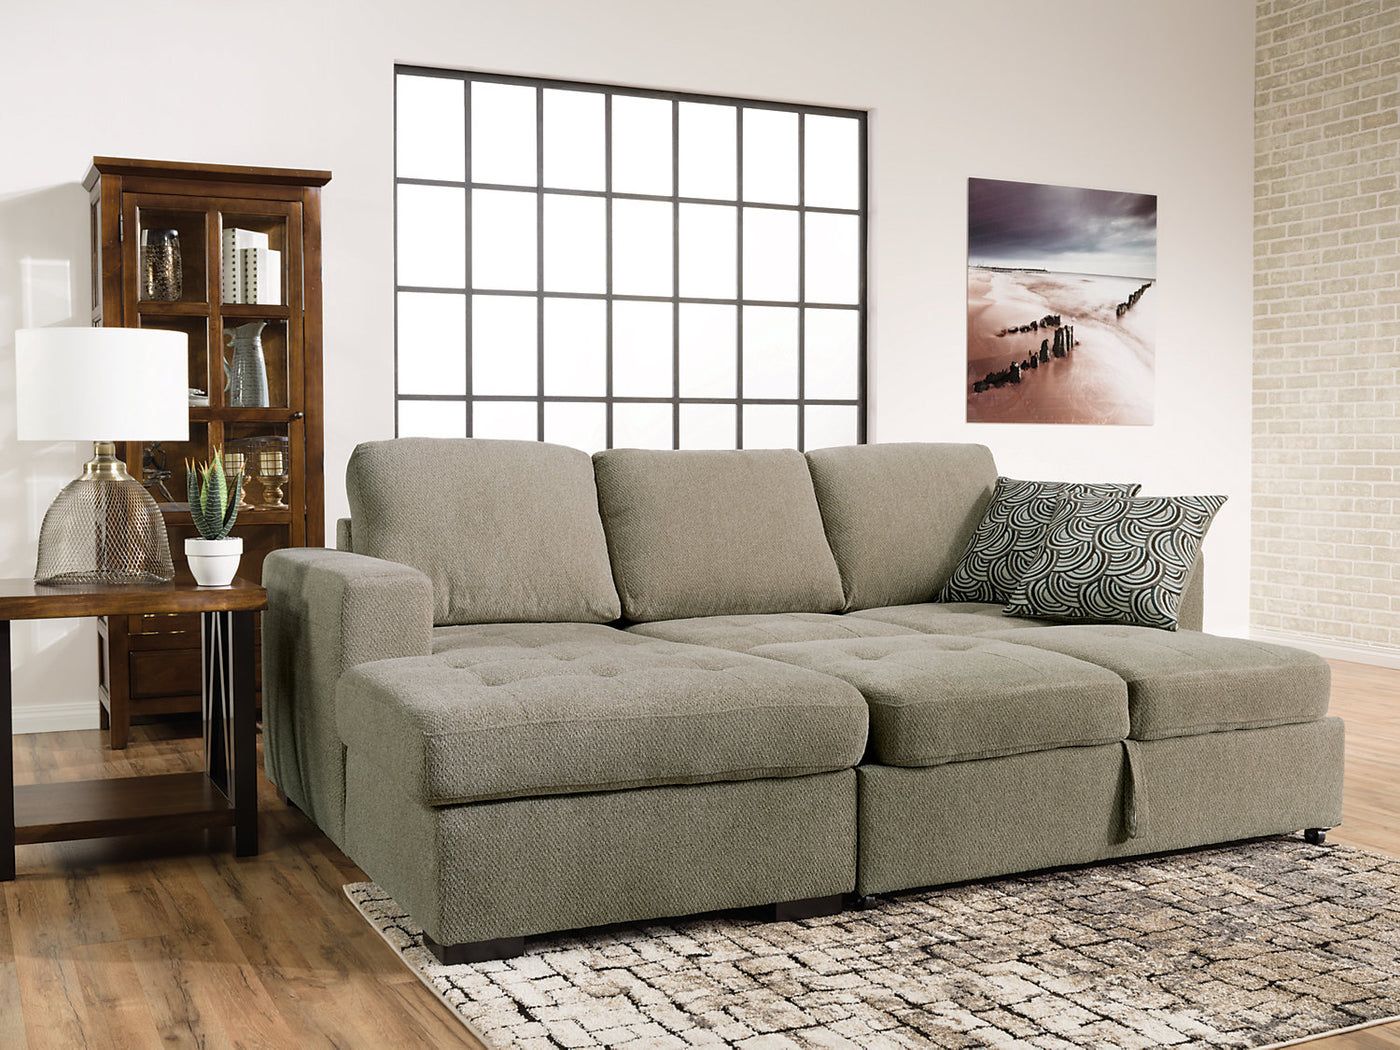 Izzy 2 Piece Chenille Left Facing Sleeper Sectional – Platinum | The Brick Intended For Left Or Right Facing Sleeper Sectionals (Gallery 12 of 21)